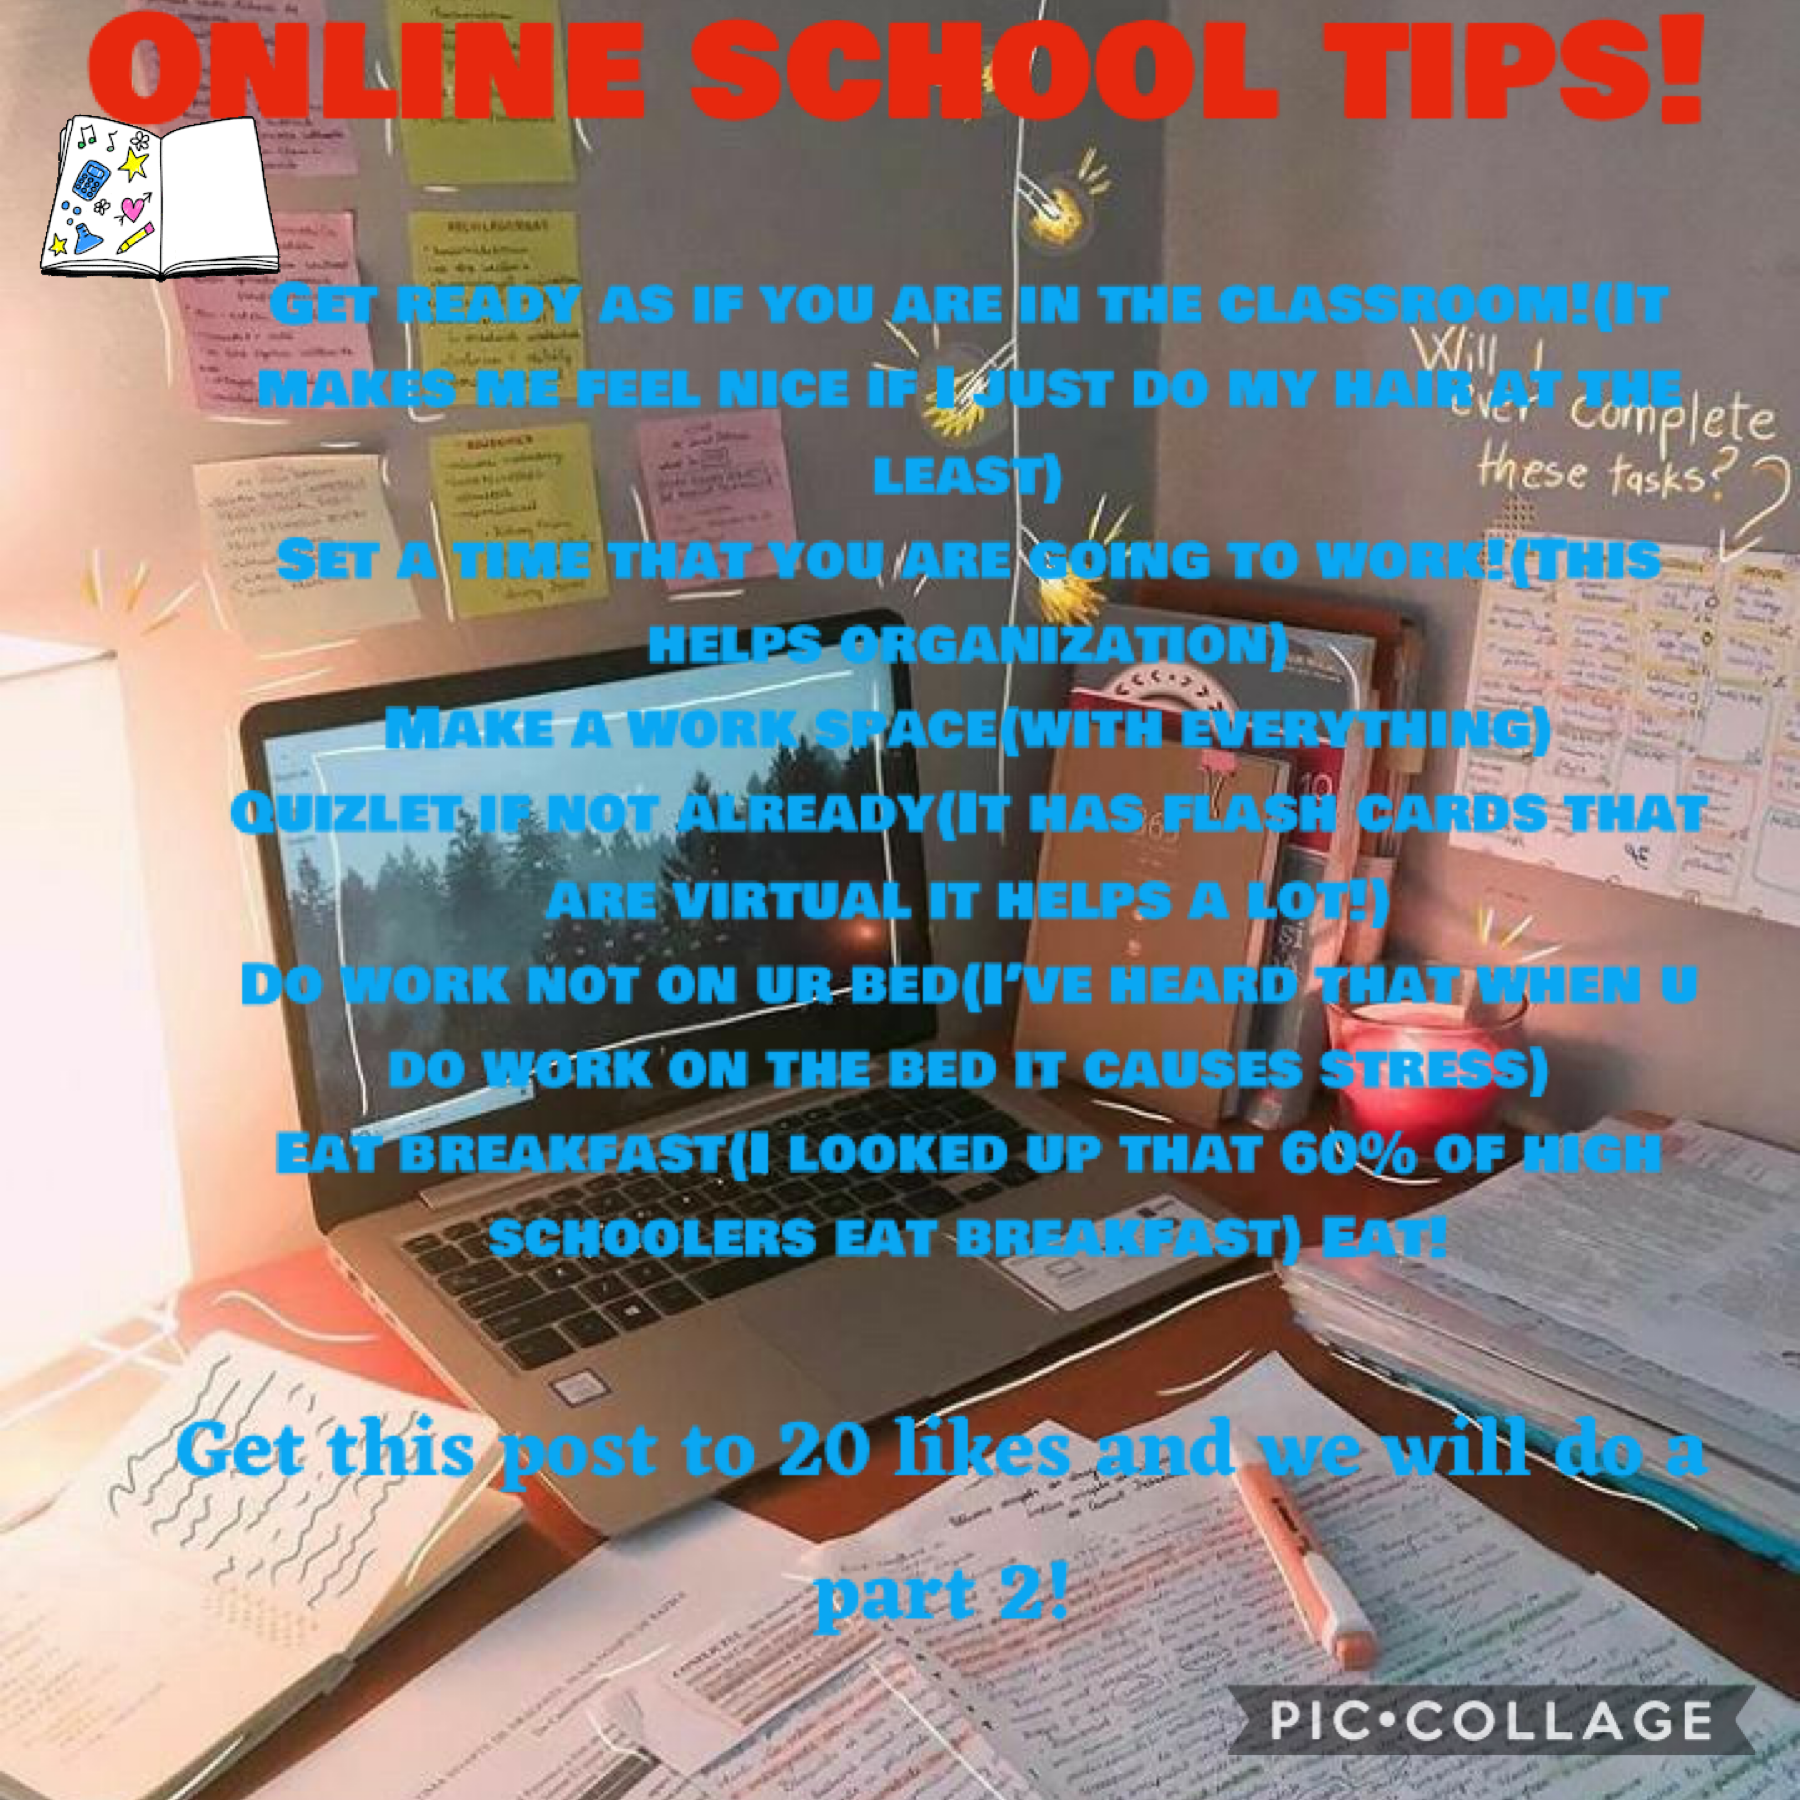 Collage by Tips4School